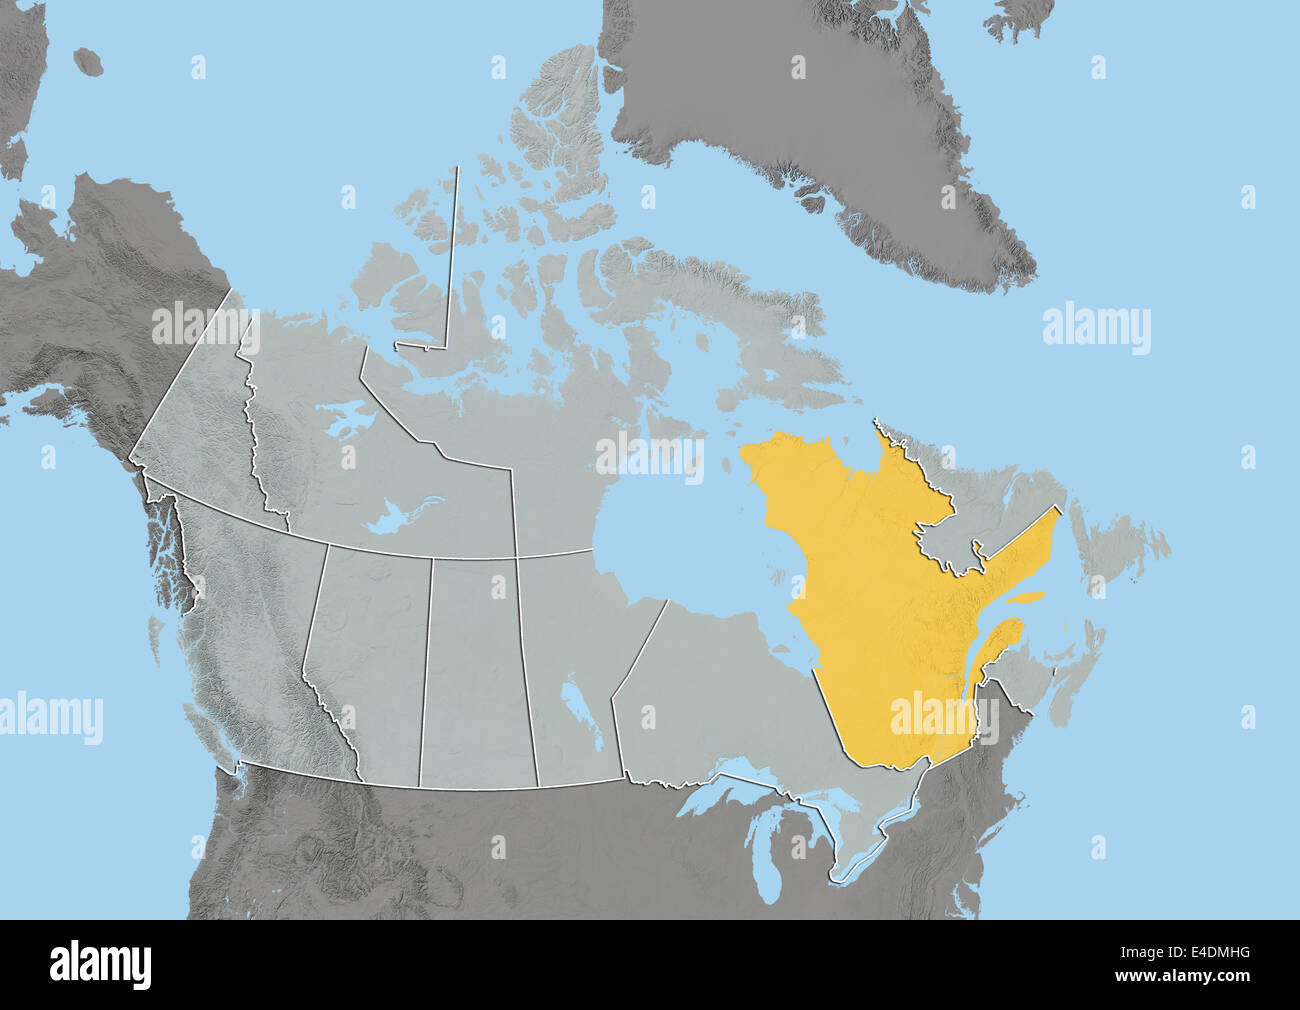 Province of Quebec, Canada, Relief Map Stock Photo